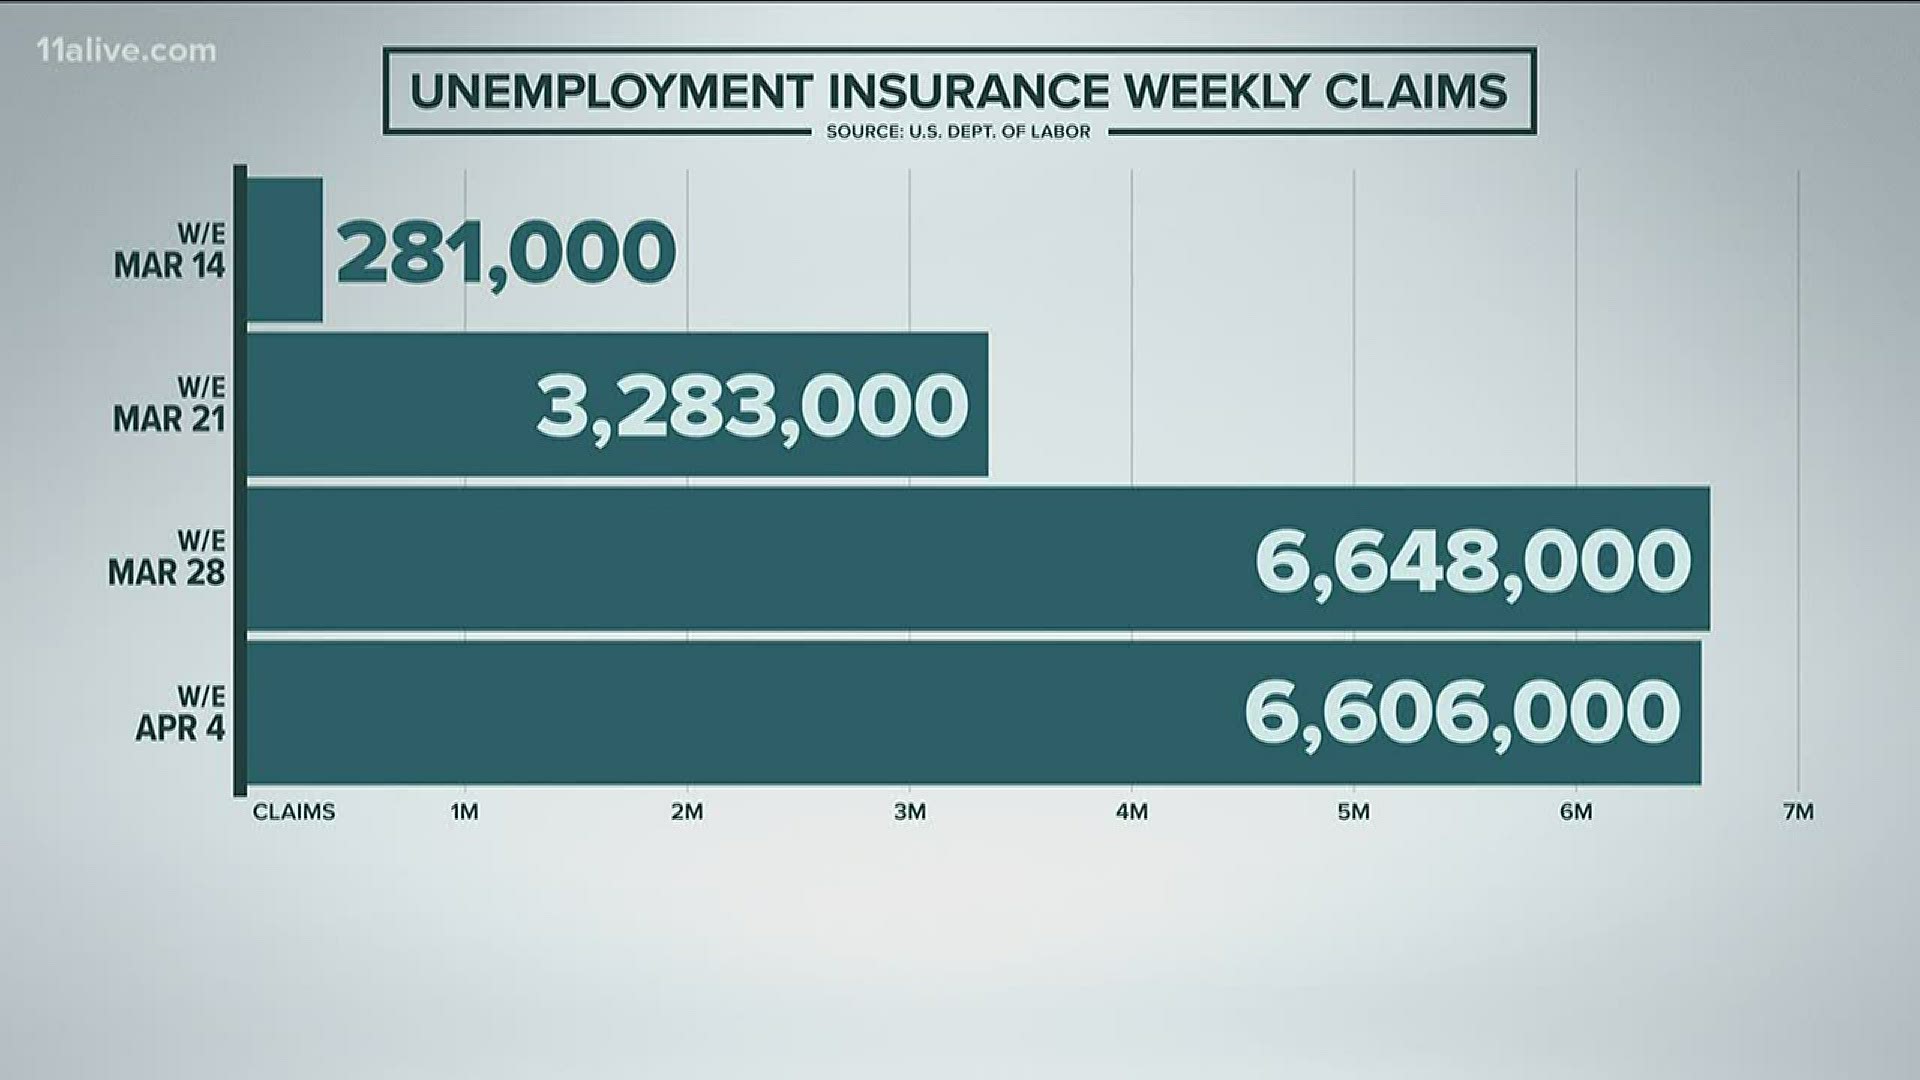 In Georgia, more than 390,000 filed an unemployment claim last week.